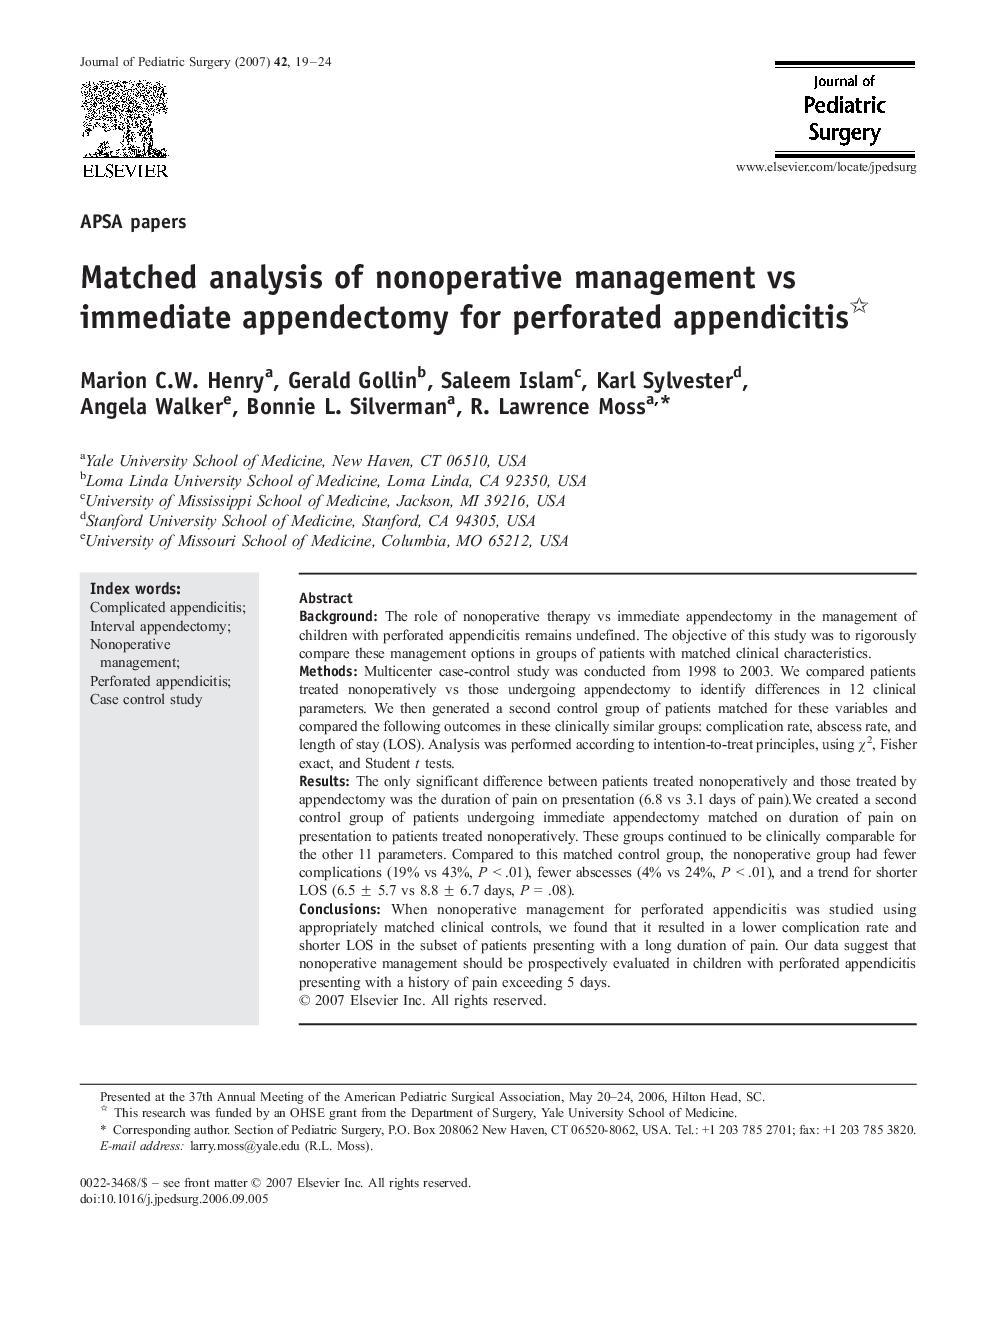 Matched analysis of nonoperative management vs immediate appendectomy for perforated appendicitis 